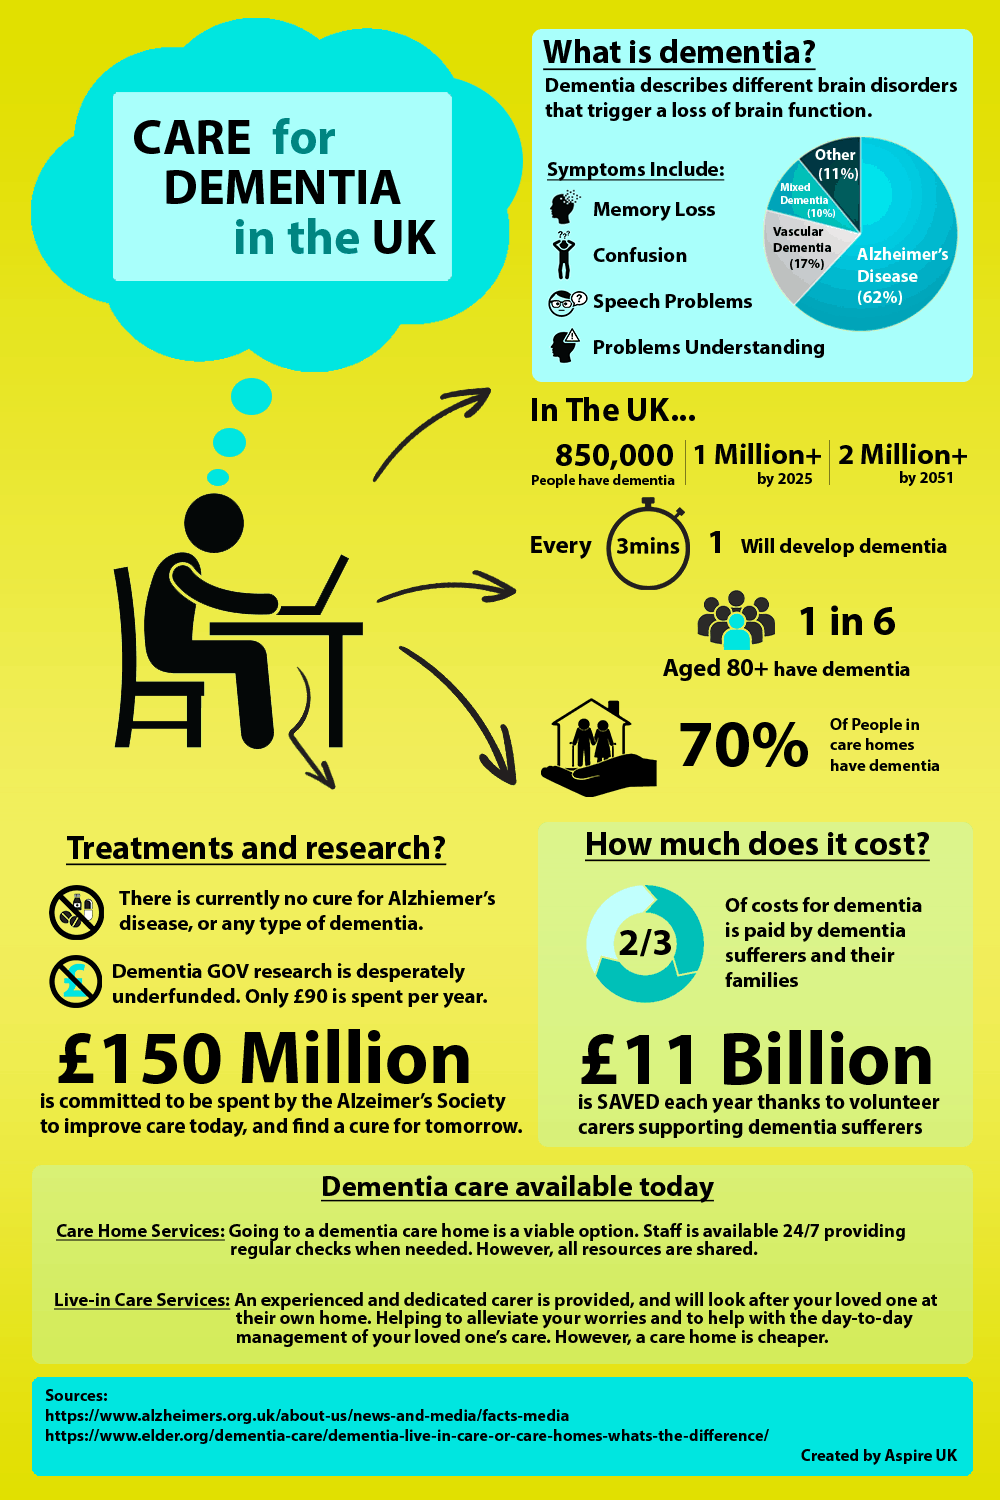 dementia-care-in-the-uk-infographic-post